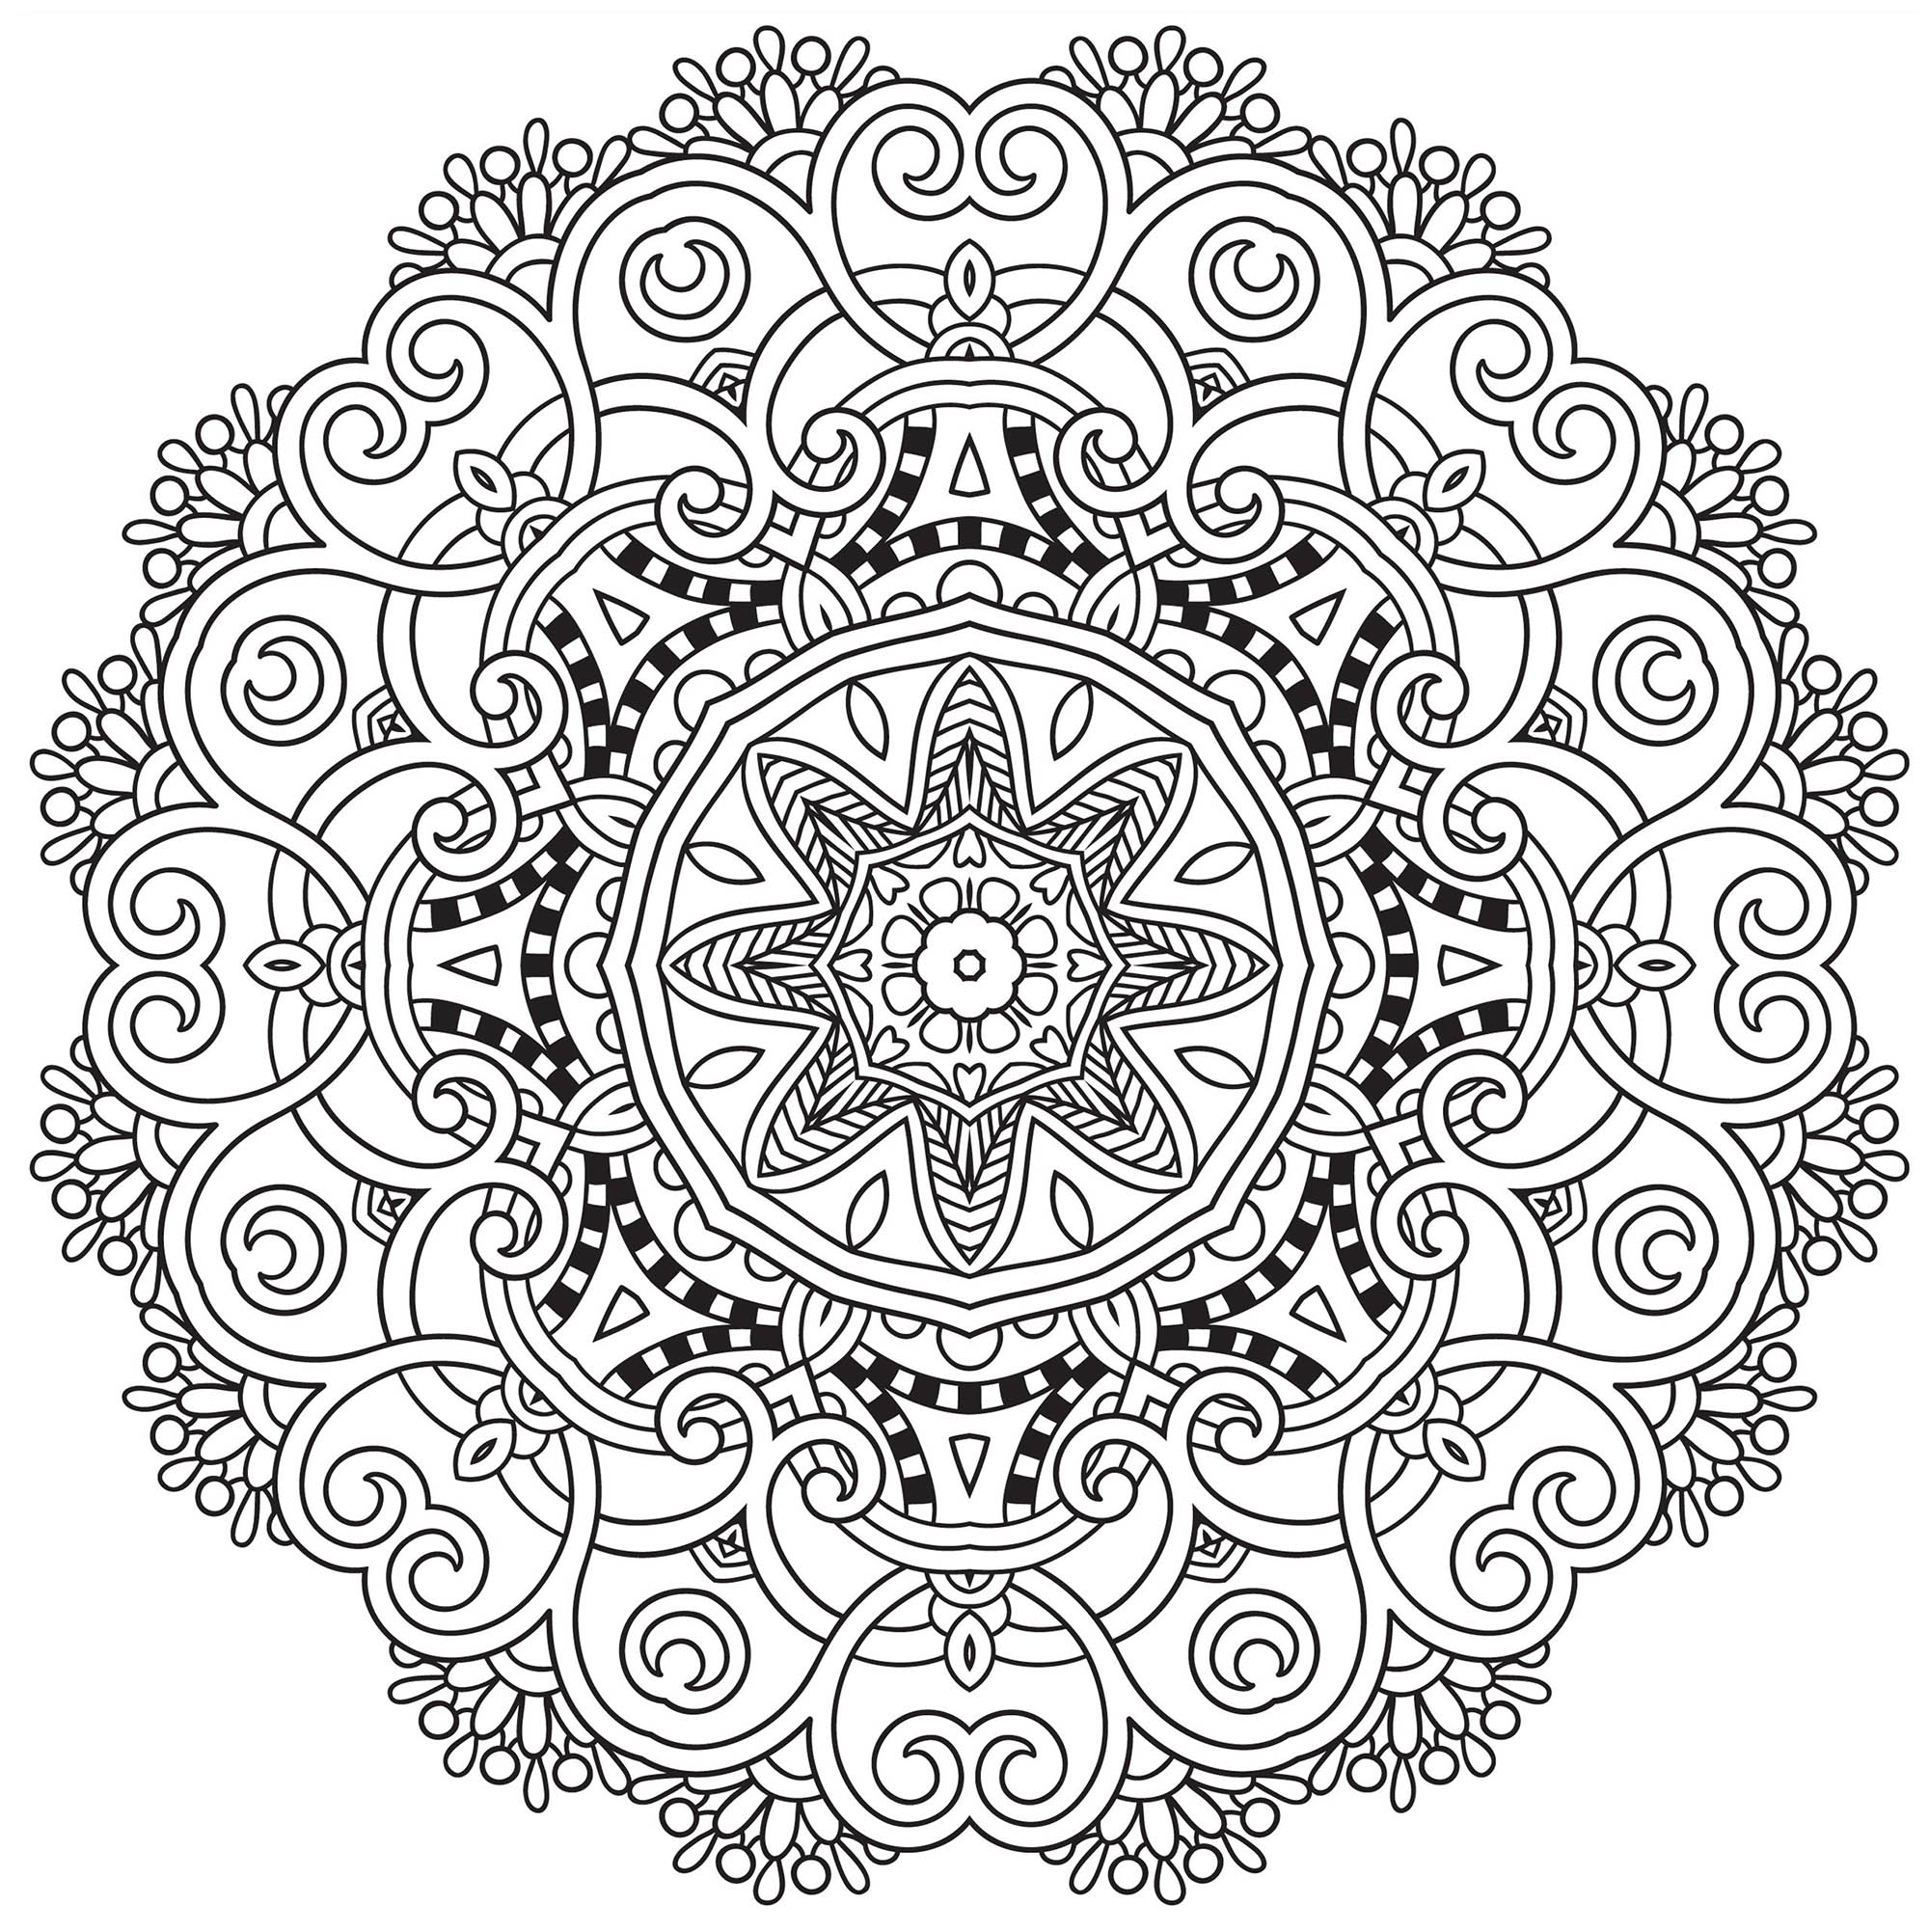 When the plant world fits perfectly into a Mandala drawing, that's what it gives. You can print it for free ! So enjoy ! This is really the perfect Mandala, don't hesitate to share with us the result.